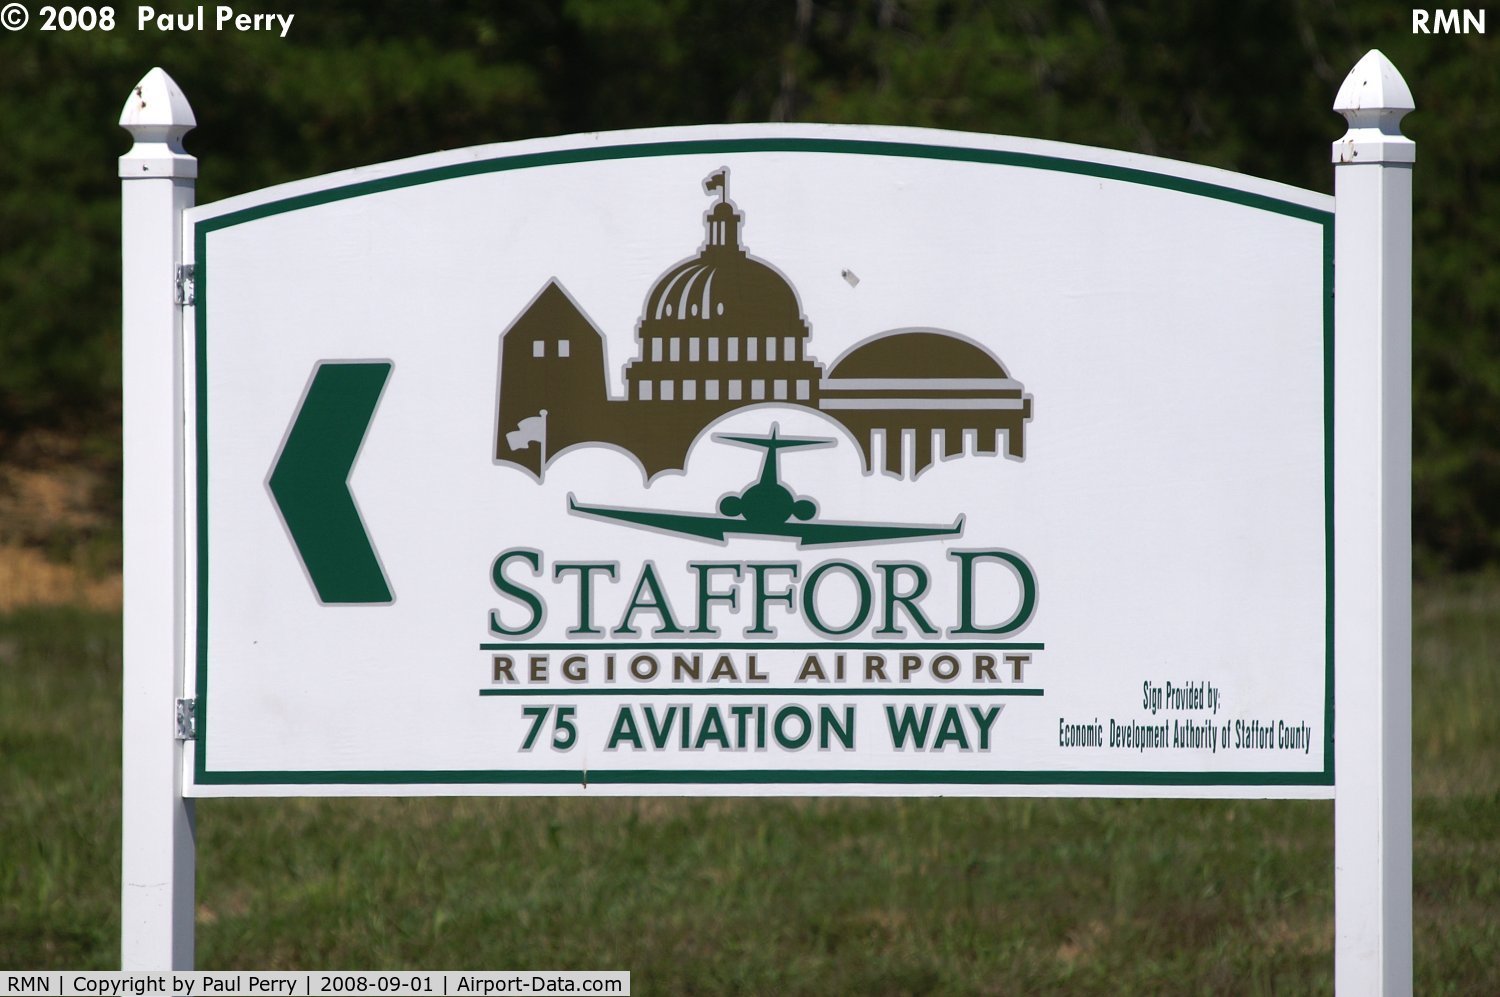 Stafford Regional Airport (RMN) - The road sign, and a good thing too; its a little off the beaten path